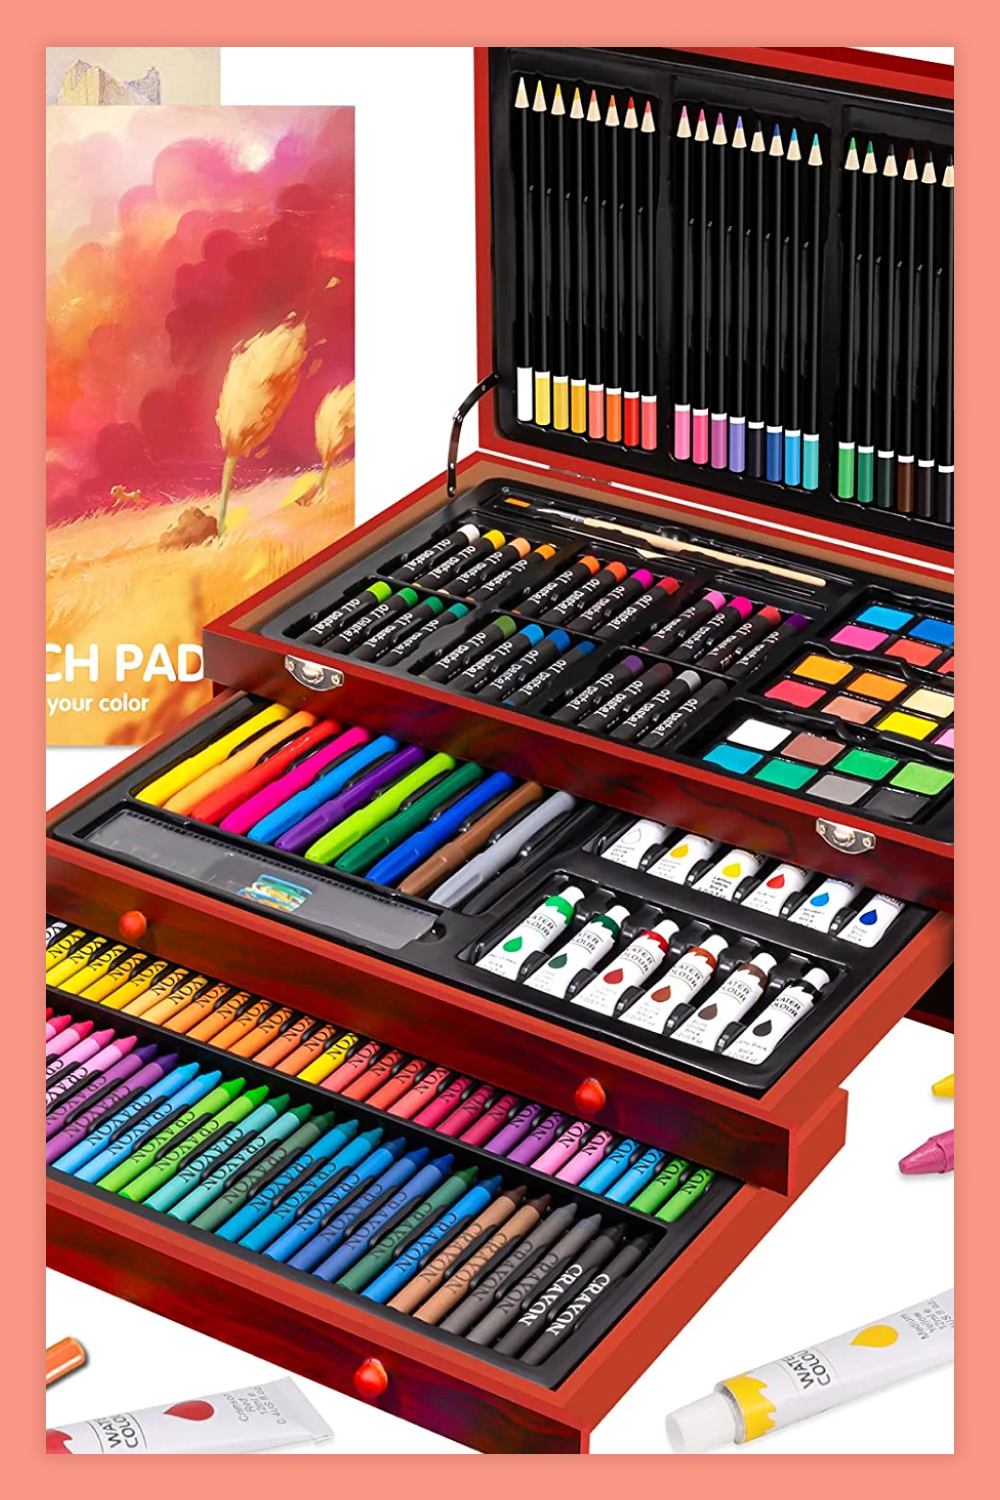 Art Supplies, 185-Piece Super Deluxe Wooden Art Set Crafts Drawing Kit with 2 Sketch Pads.